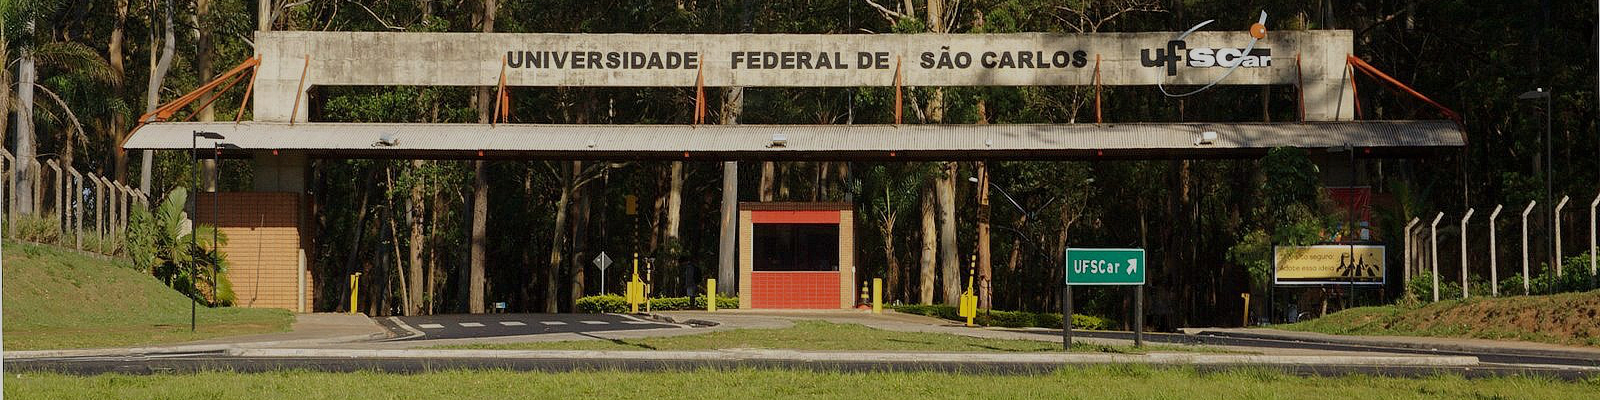 The image represents the entrance to the southern area of the UFSCar campus in São Carlos. The entrance has a guard post in the center and vehicle circulation to the left and right, in addition to the black sign written “Universidade Federal de São Carlos”(Federal University of São Carlos). The vegetation appears in the background, and it is possible to notice several trees, which comprise a good part of the campus landscape.